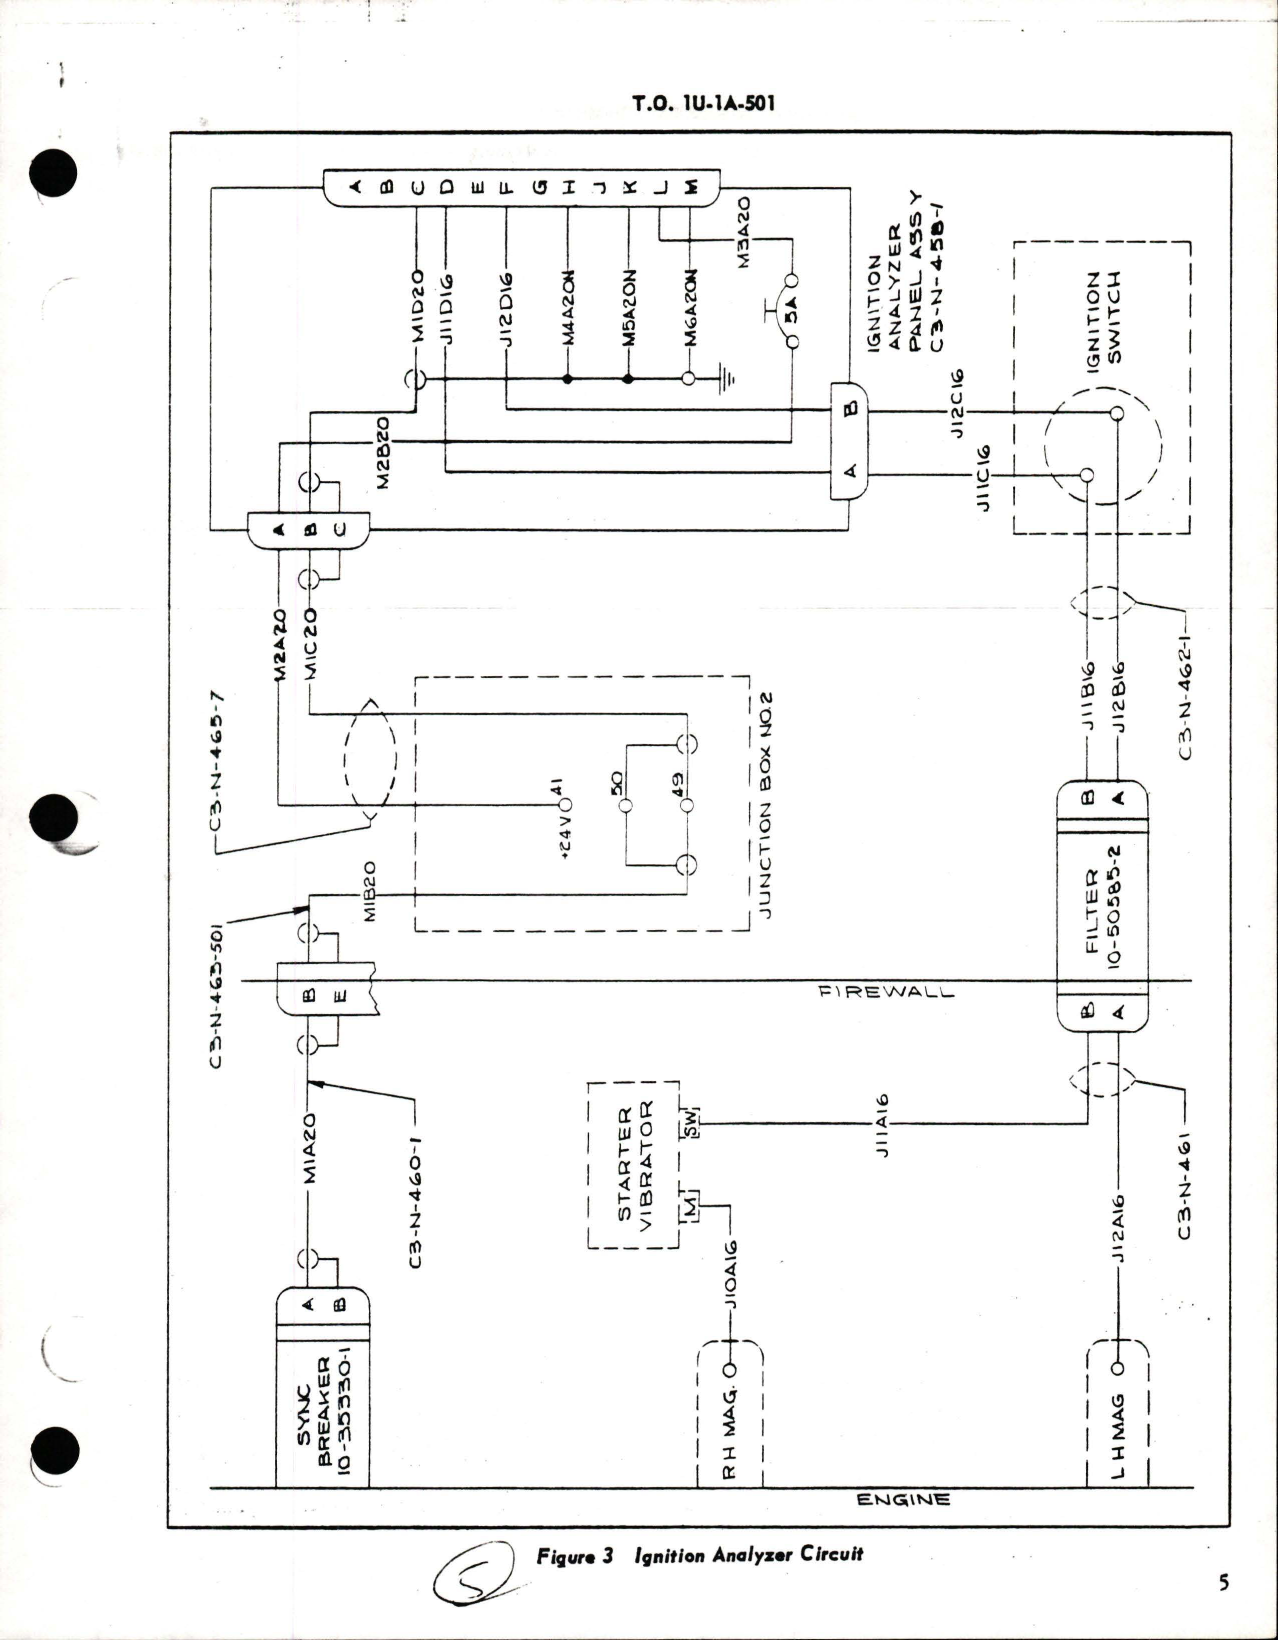 Sample page 5 from AirCorps Library document: Installation of Bendix Ignition Analyzer - U-1A Series